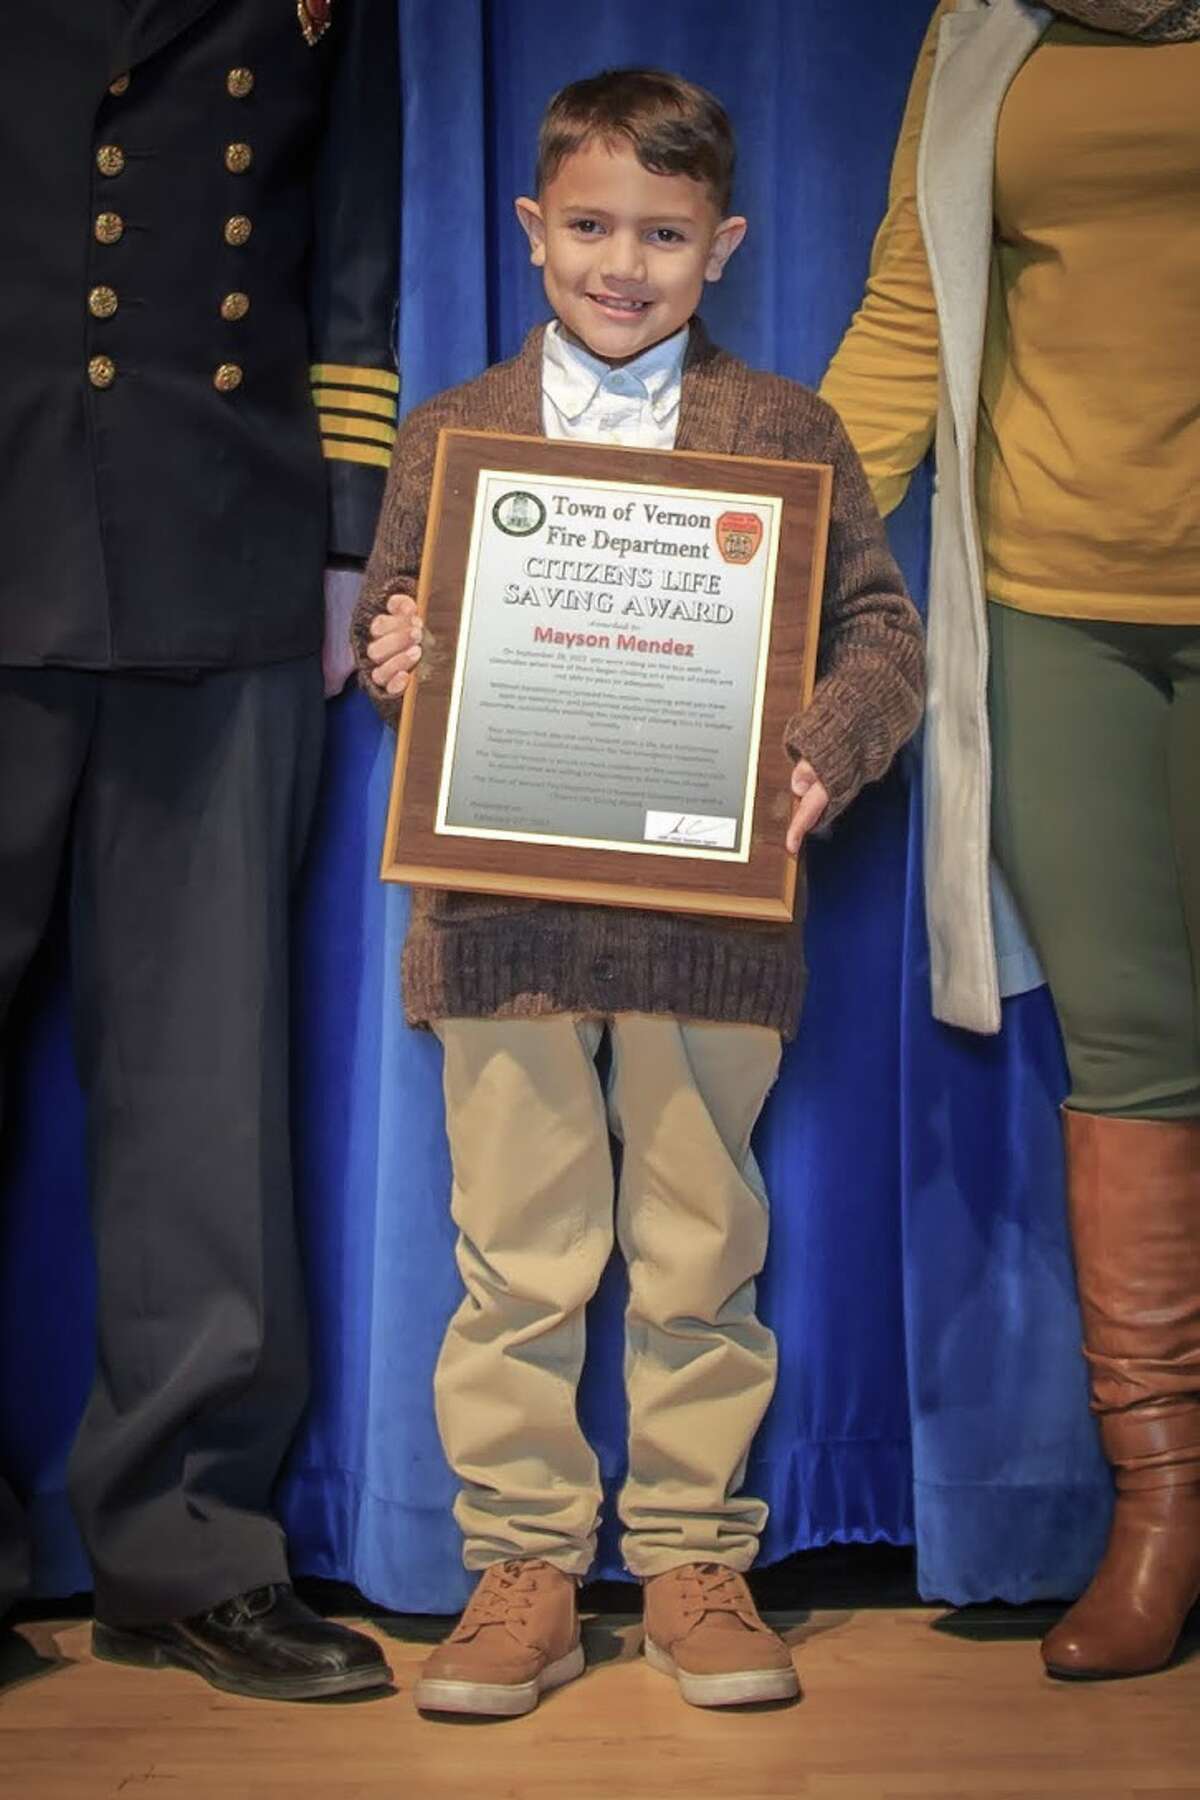 Mayson Mendez, 9, of Vernon, was honored with the Vernon Fire Department's Citizens Life Saving Award Monday night for saving the life of a choking schoolmate in September, according to town officials. He was 8 at the time.